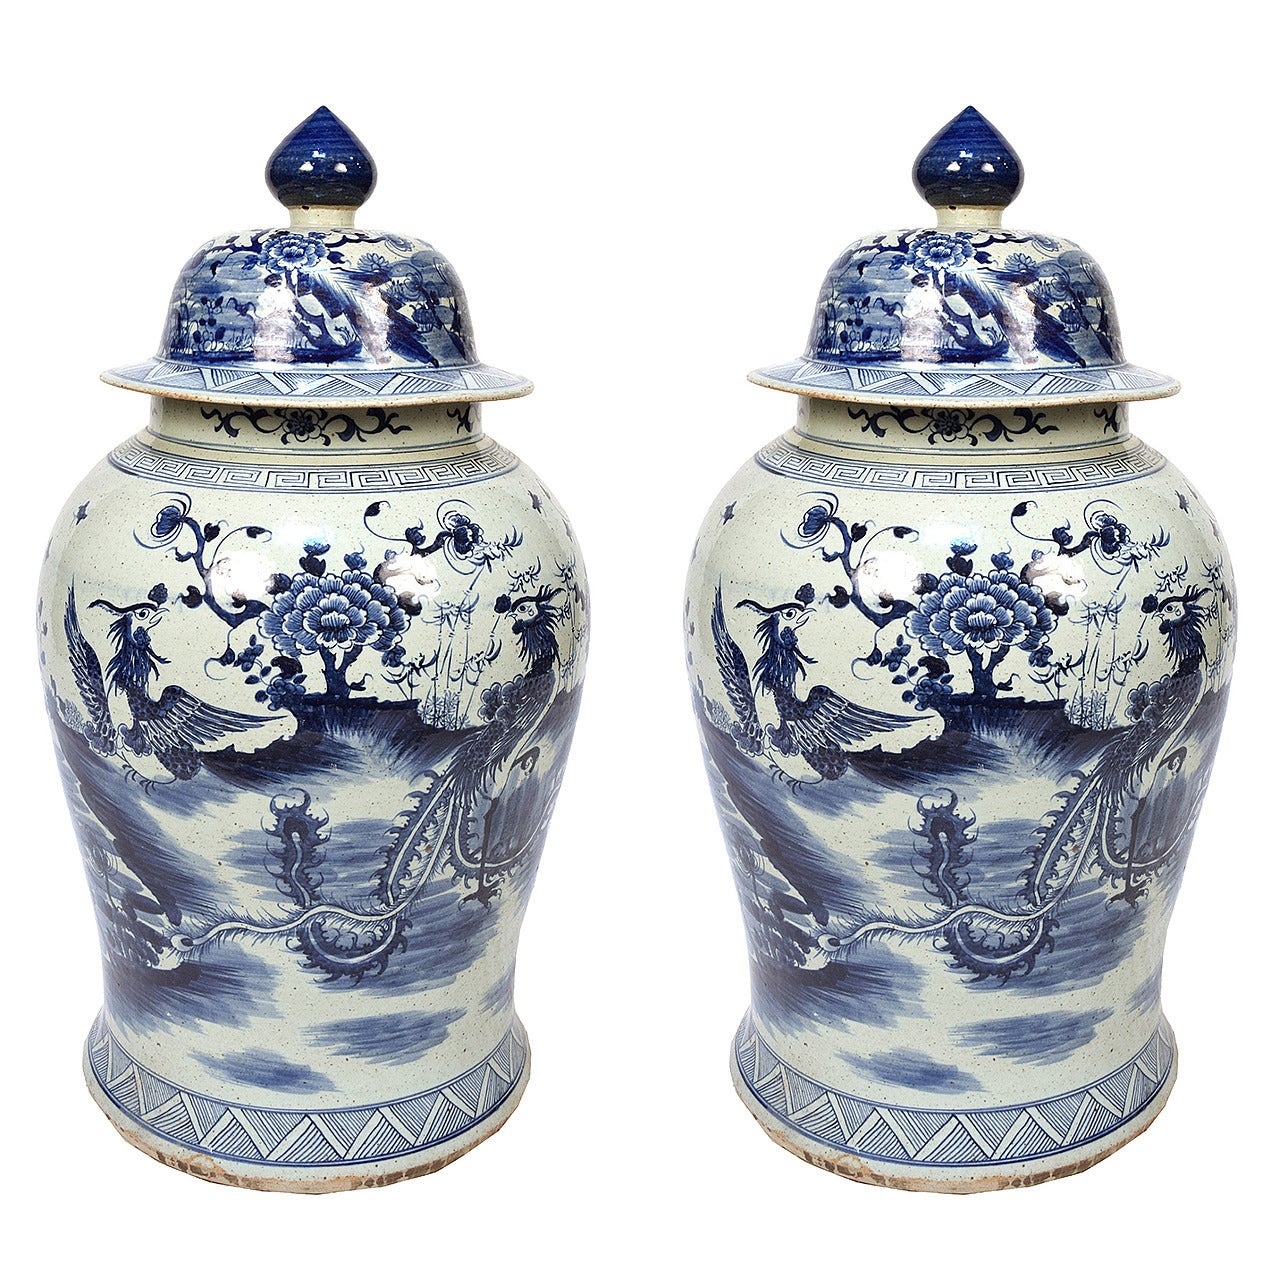 Pair of Blue and White Ginger Jar with Phoenix and Peonies